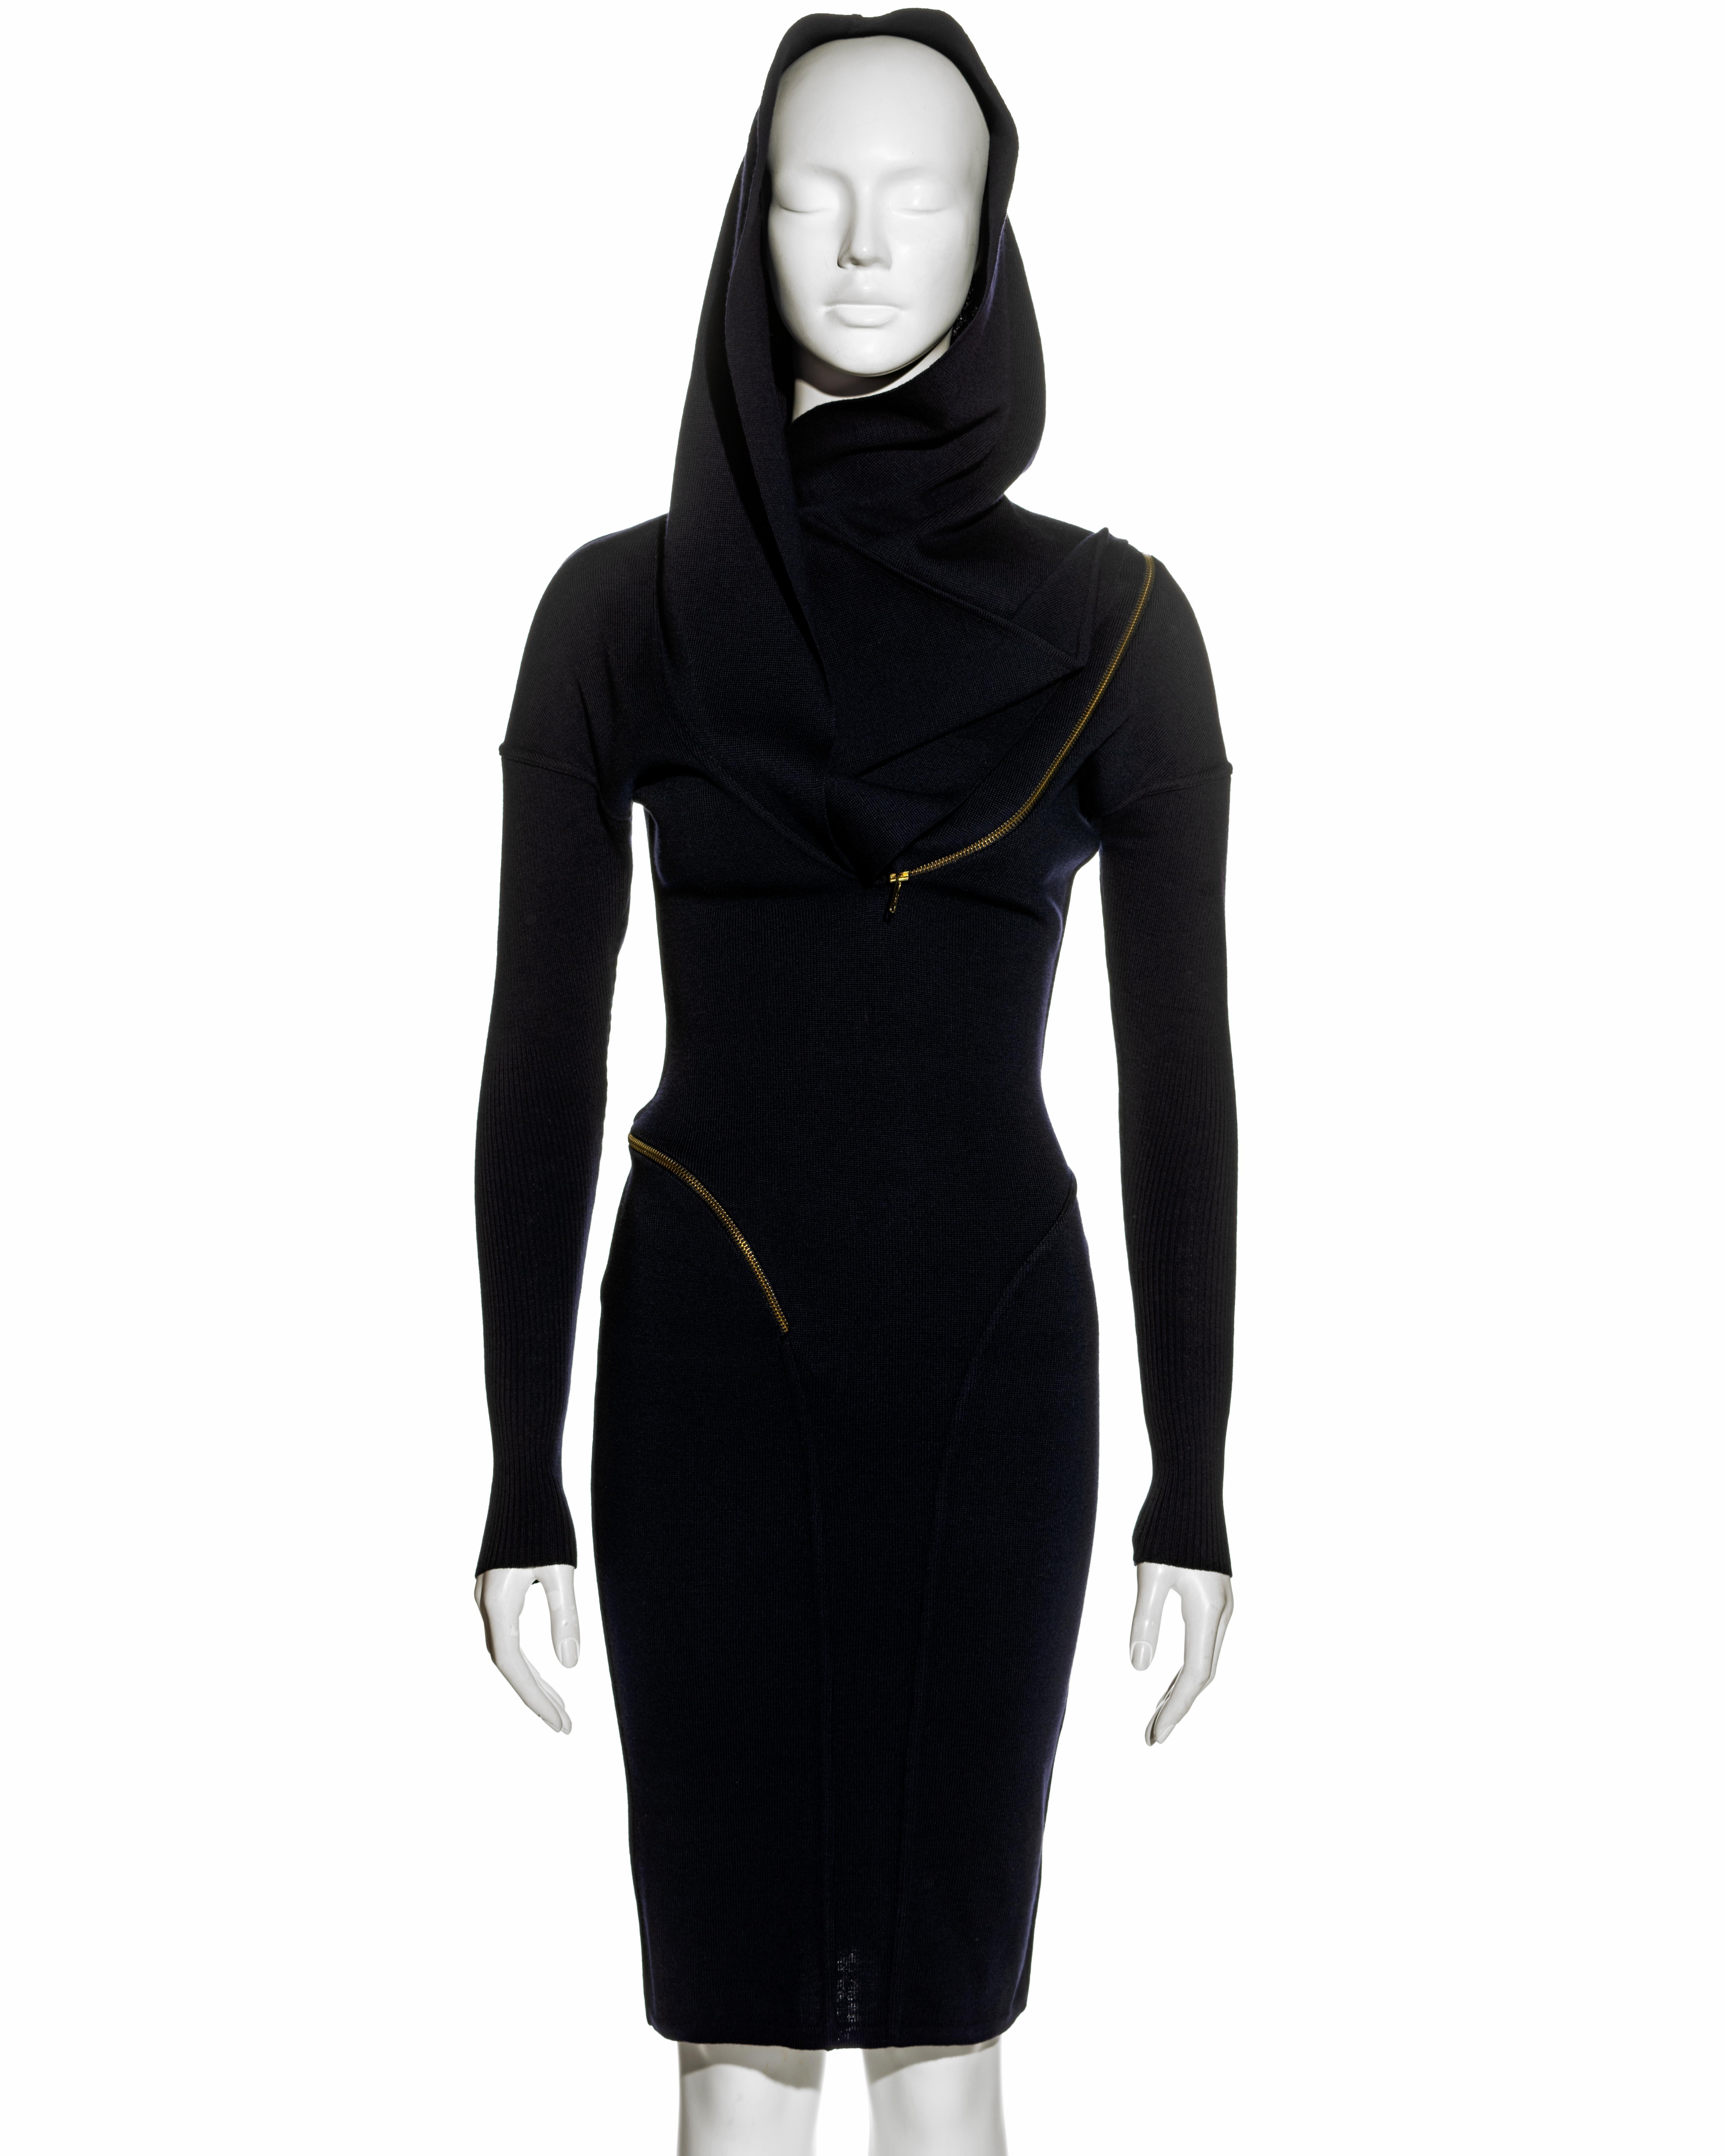 ▪ Azzedine Alaia knitted virgin wool dress
▪ Single zip fastening circles the body starting at the right hip and ending at the left breast
▪ Integral hood with scarf ending on one side closing with a snap button
▪ Knee-length skirt 
▪ Long sleeves
▪